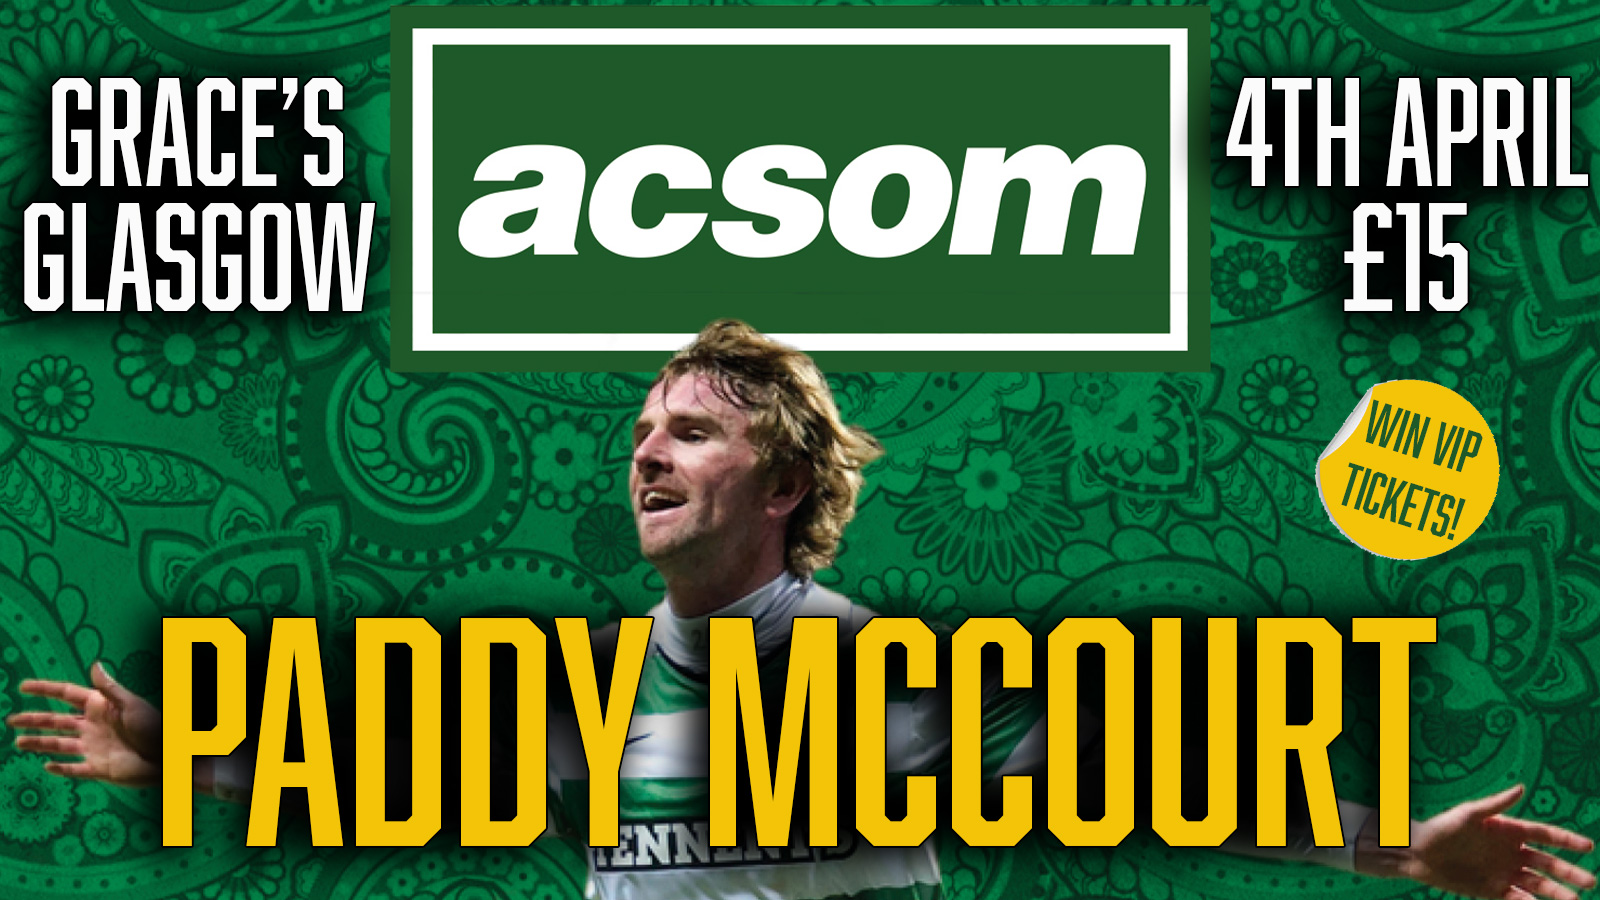 Win 2 VIP tickets for Paddy McCourt in conversation with A Celtic State of Mind